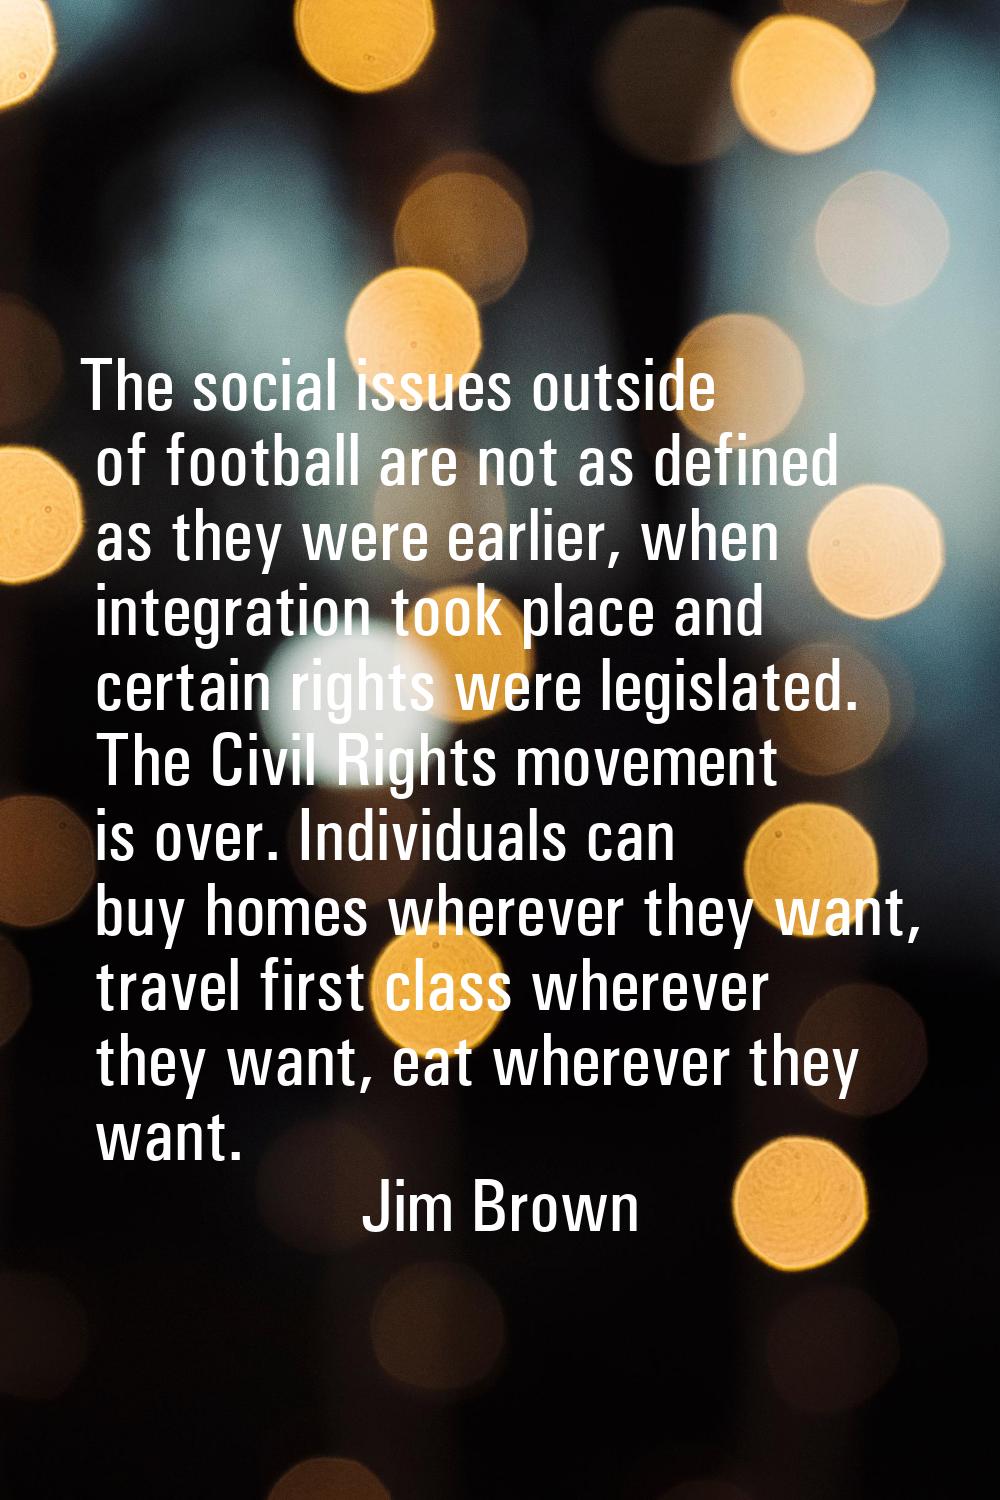 The social issues outside of football are not as defined as they were earlier, when integration too